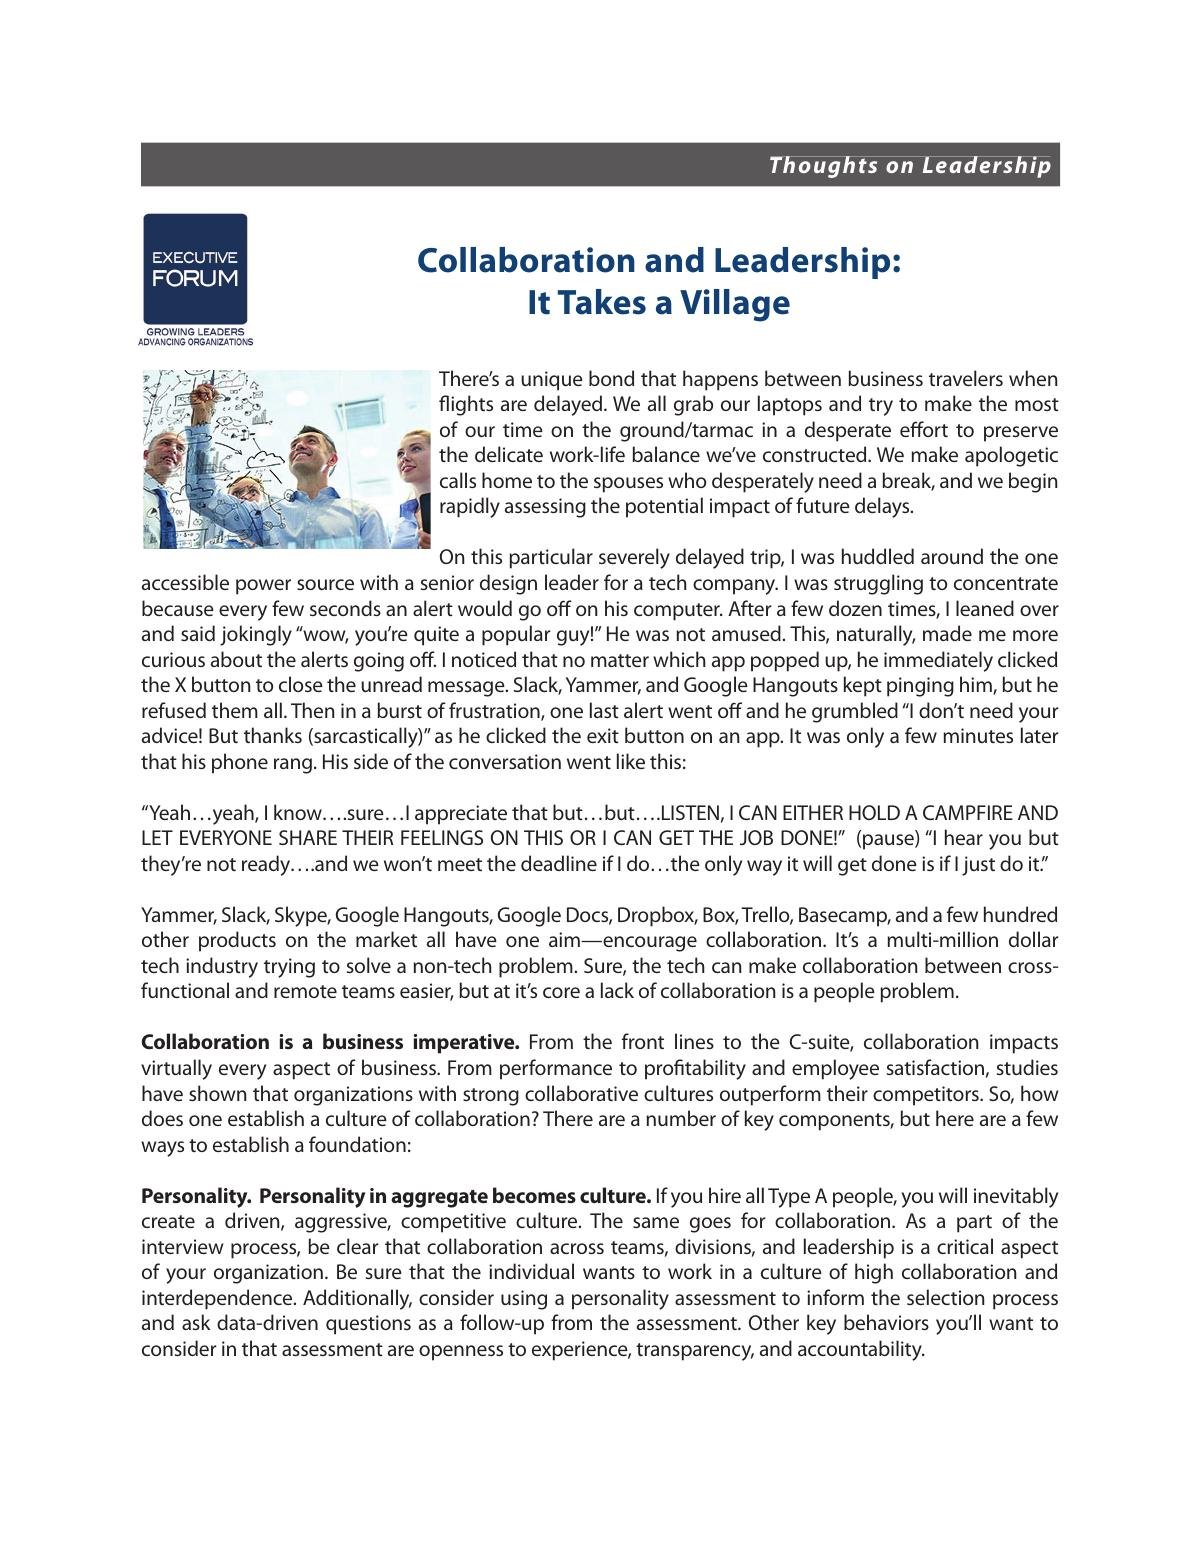 Collaboration and Leadership: It Takes a Village